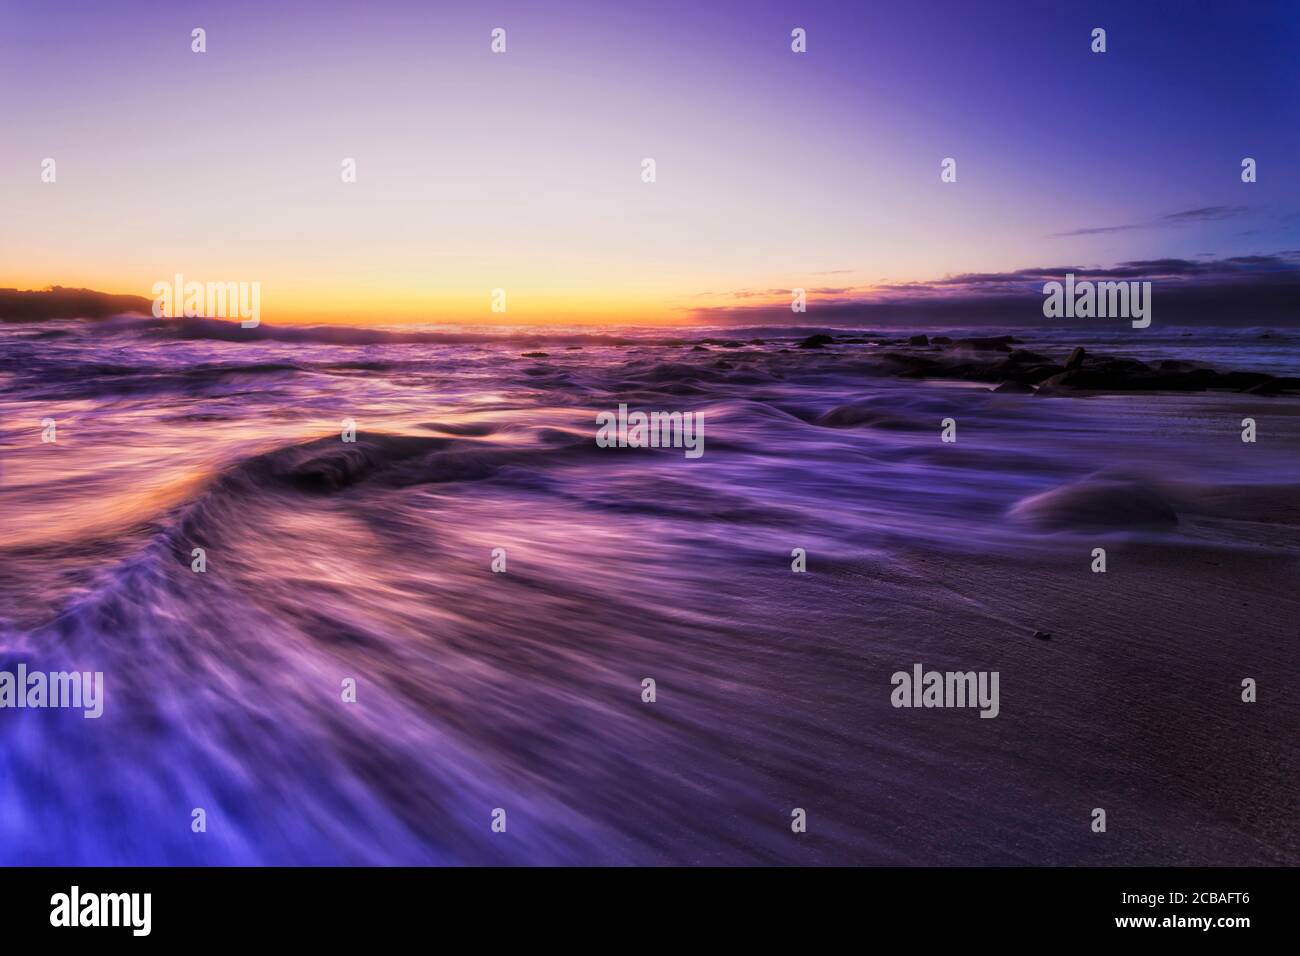 Tail of outgoing wave on sands of Bronte beach in Sydney at dawn facing risign sun and Pacific ocean. Stock Photo